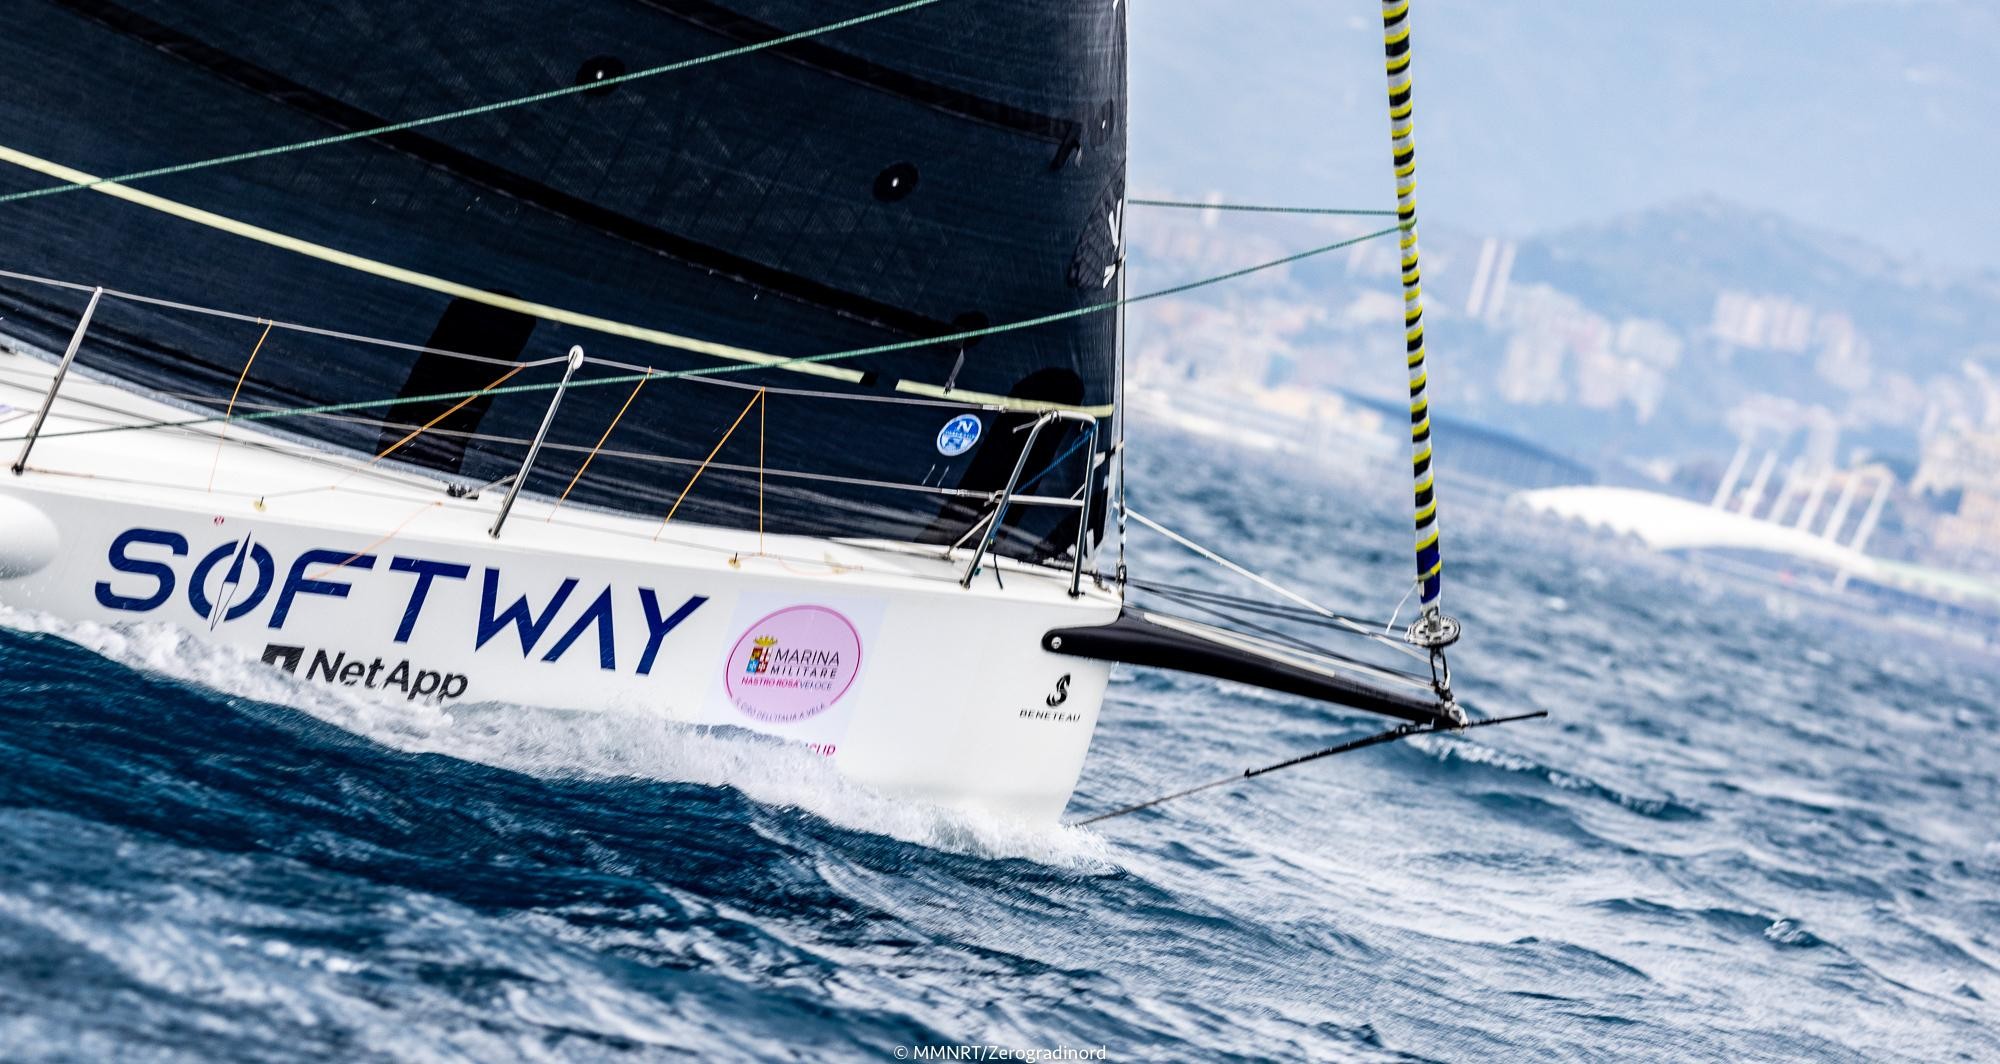 Nastro Rosa: Team Softway and Team Venezia Salone Nautico are in Genoa as second and third